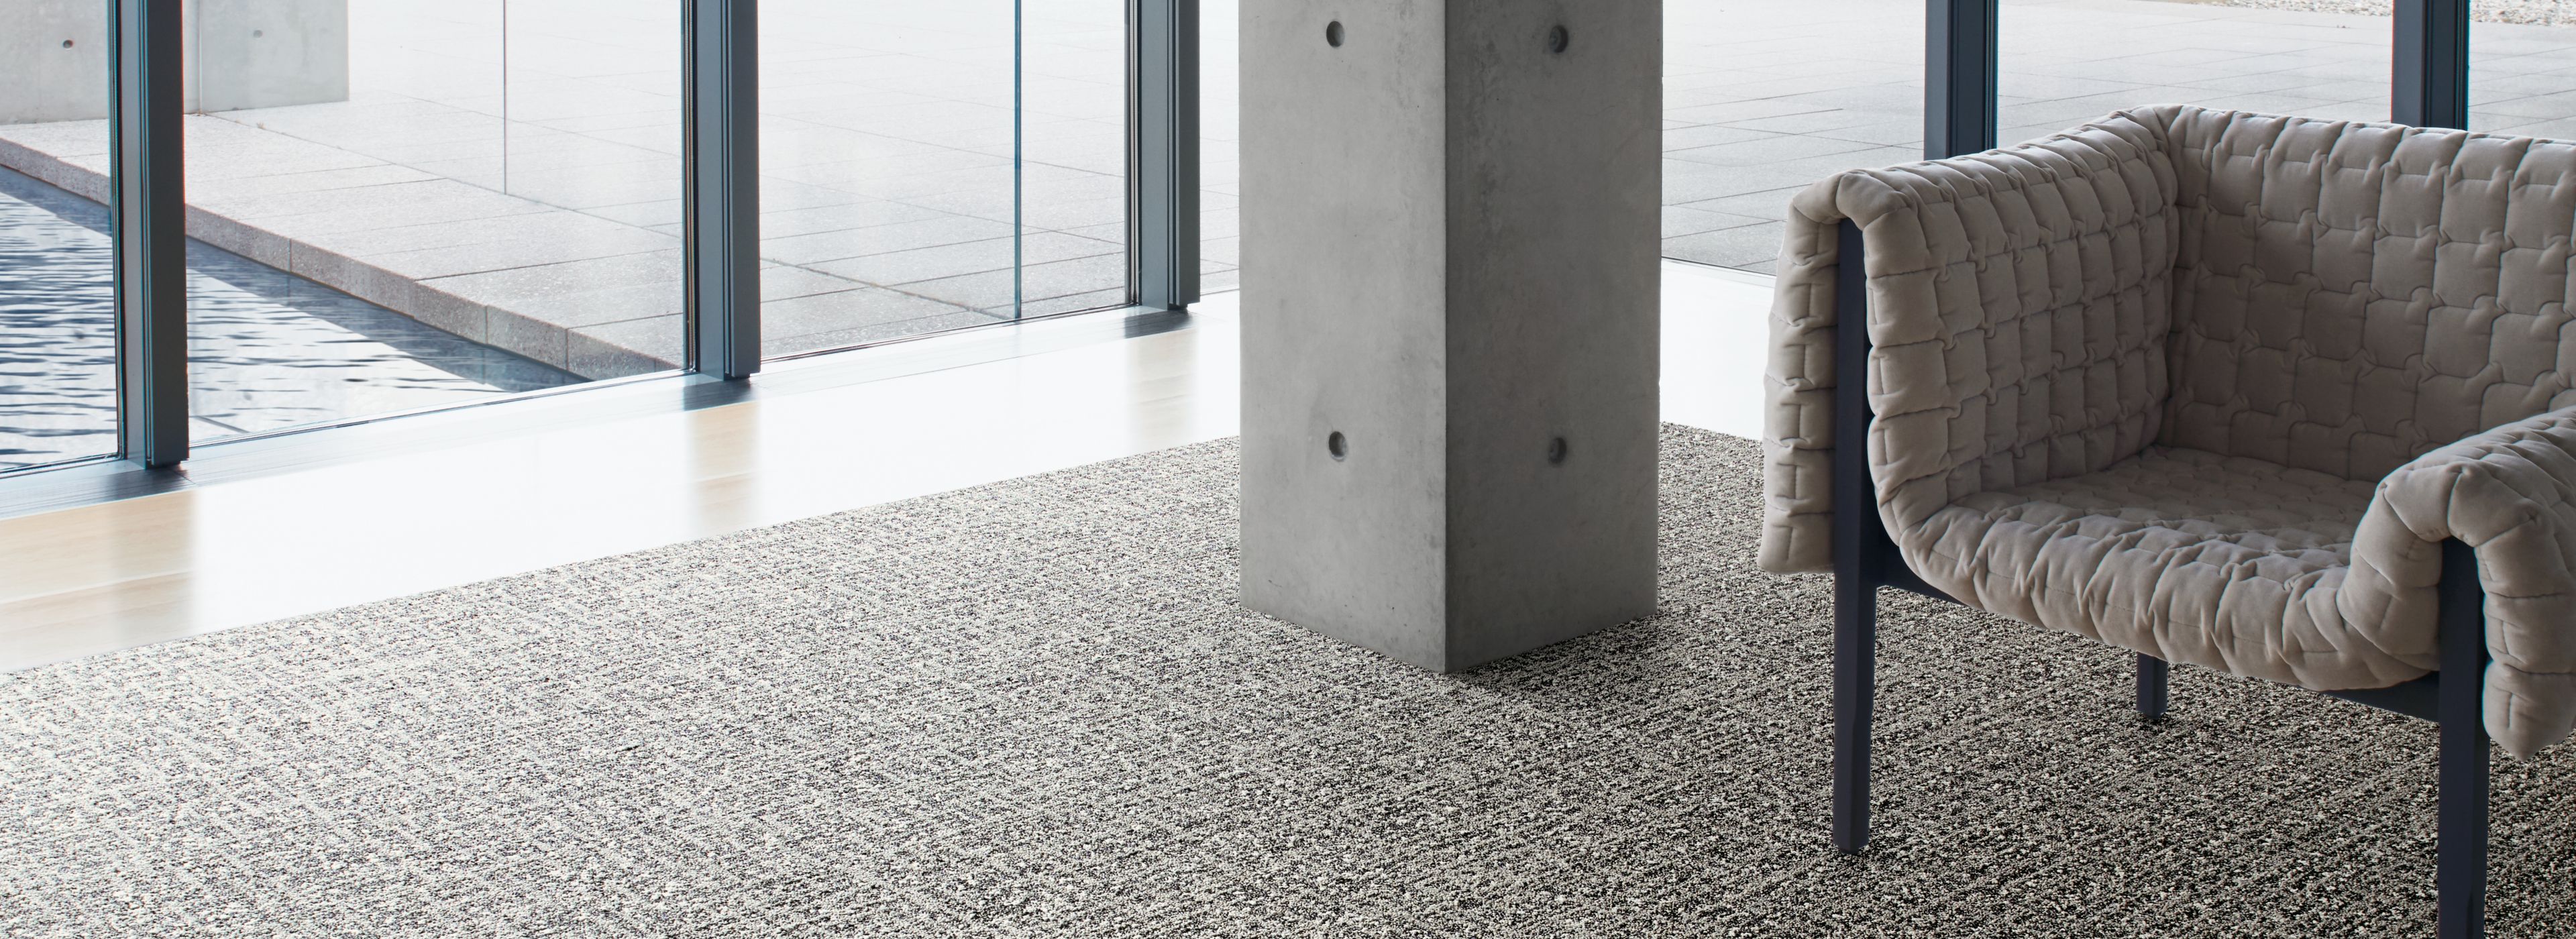 Interface WW890 plank carpet tile and Textured Stones LVT in lobby area with chair número de imagen 1